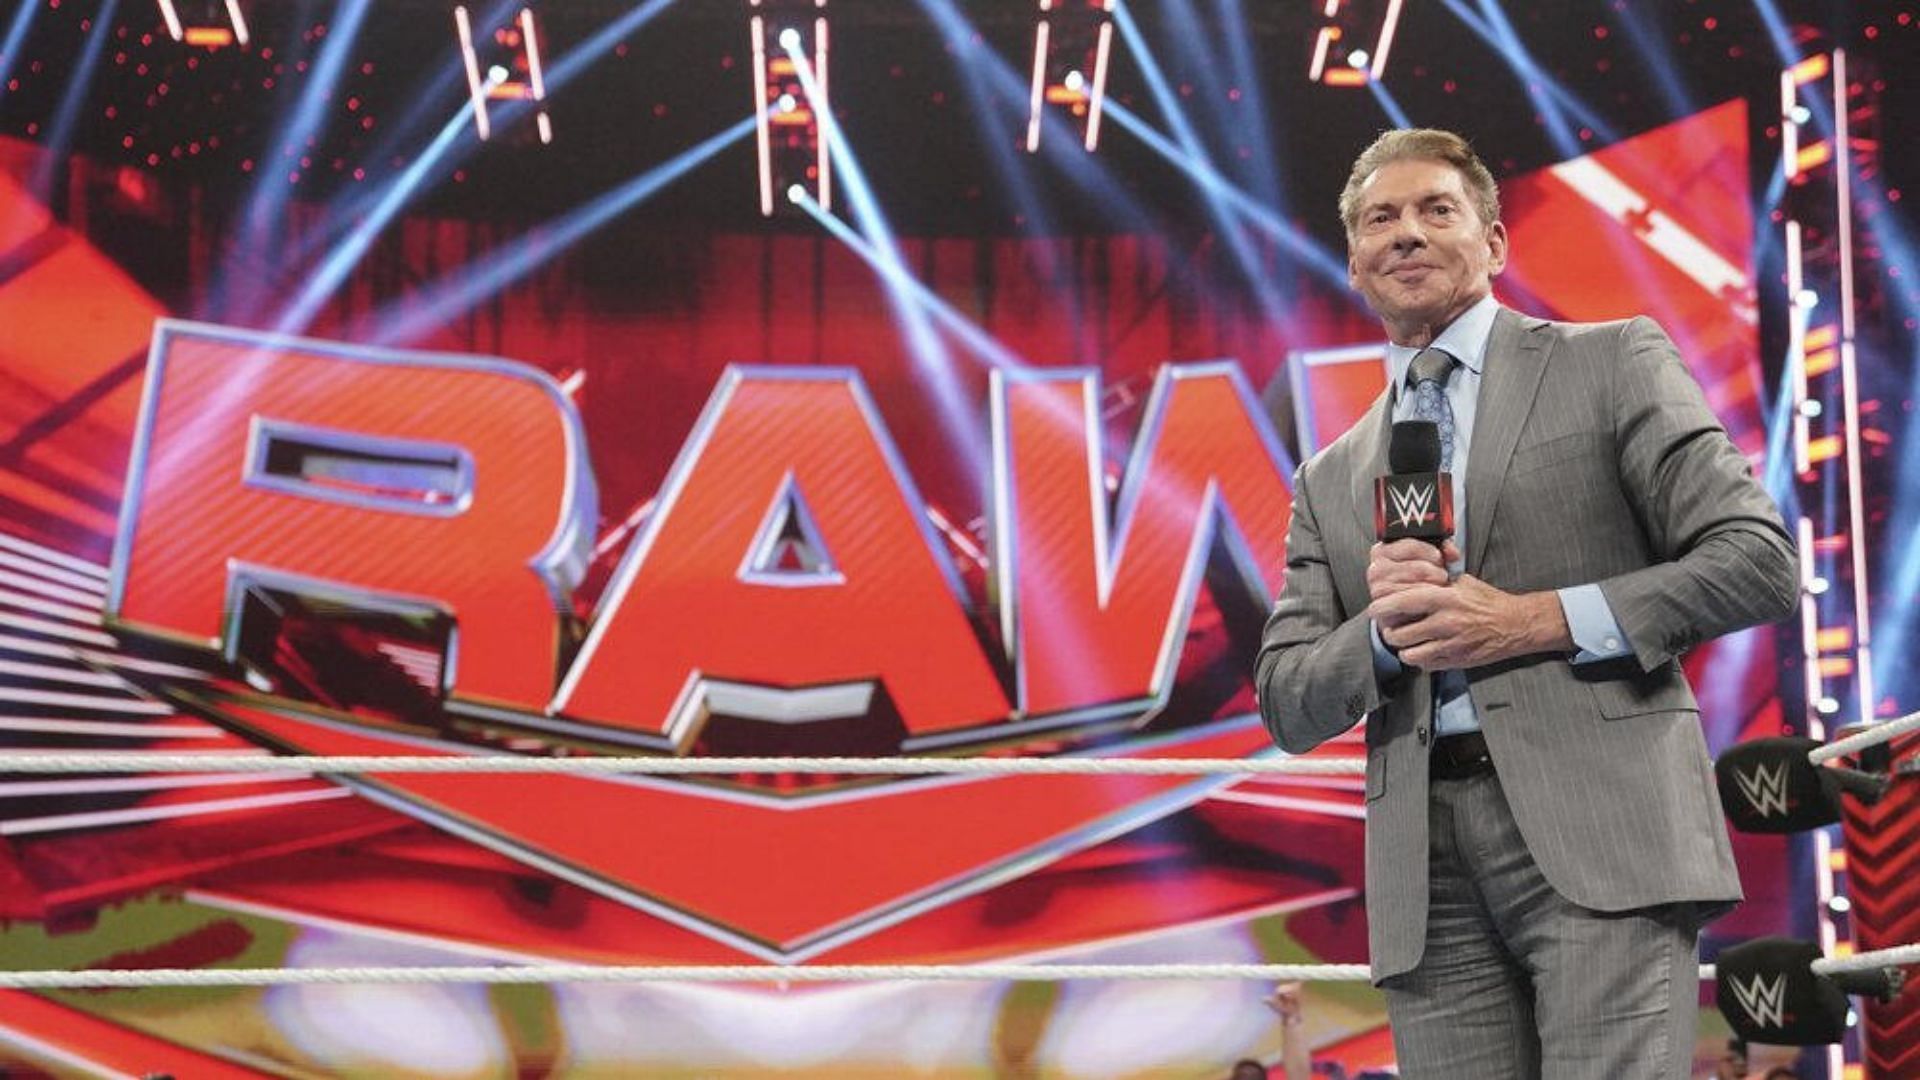 Vince McMahon is the founder of WWE [Photo courtesy of WWE